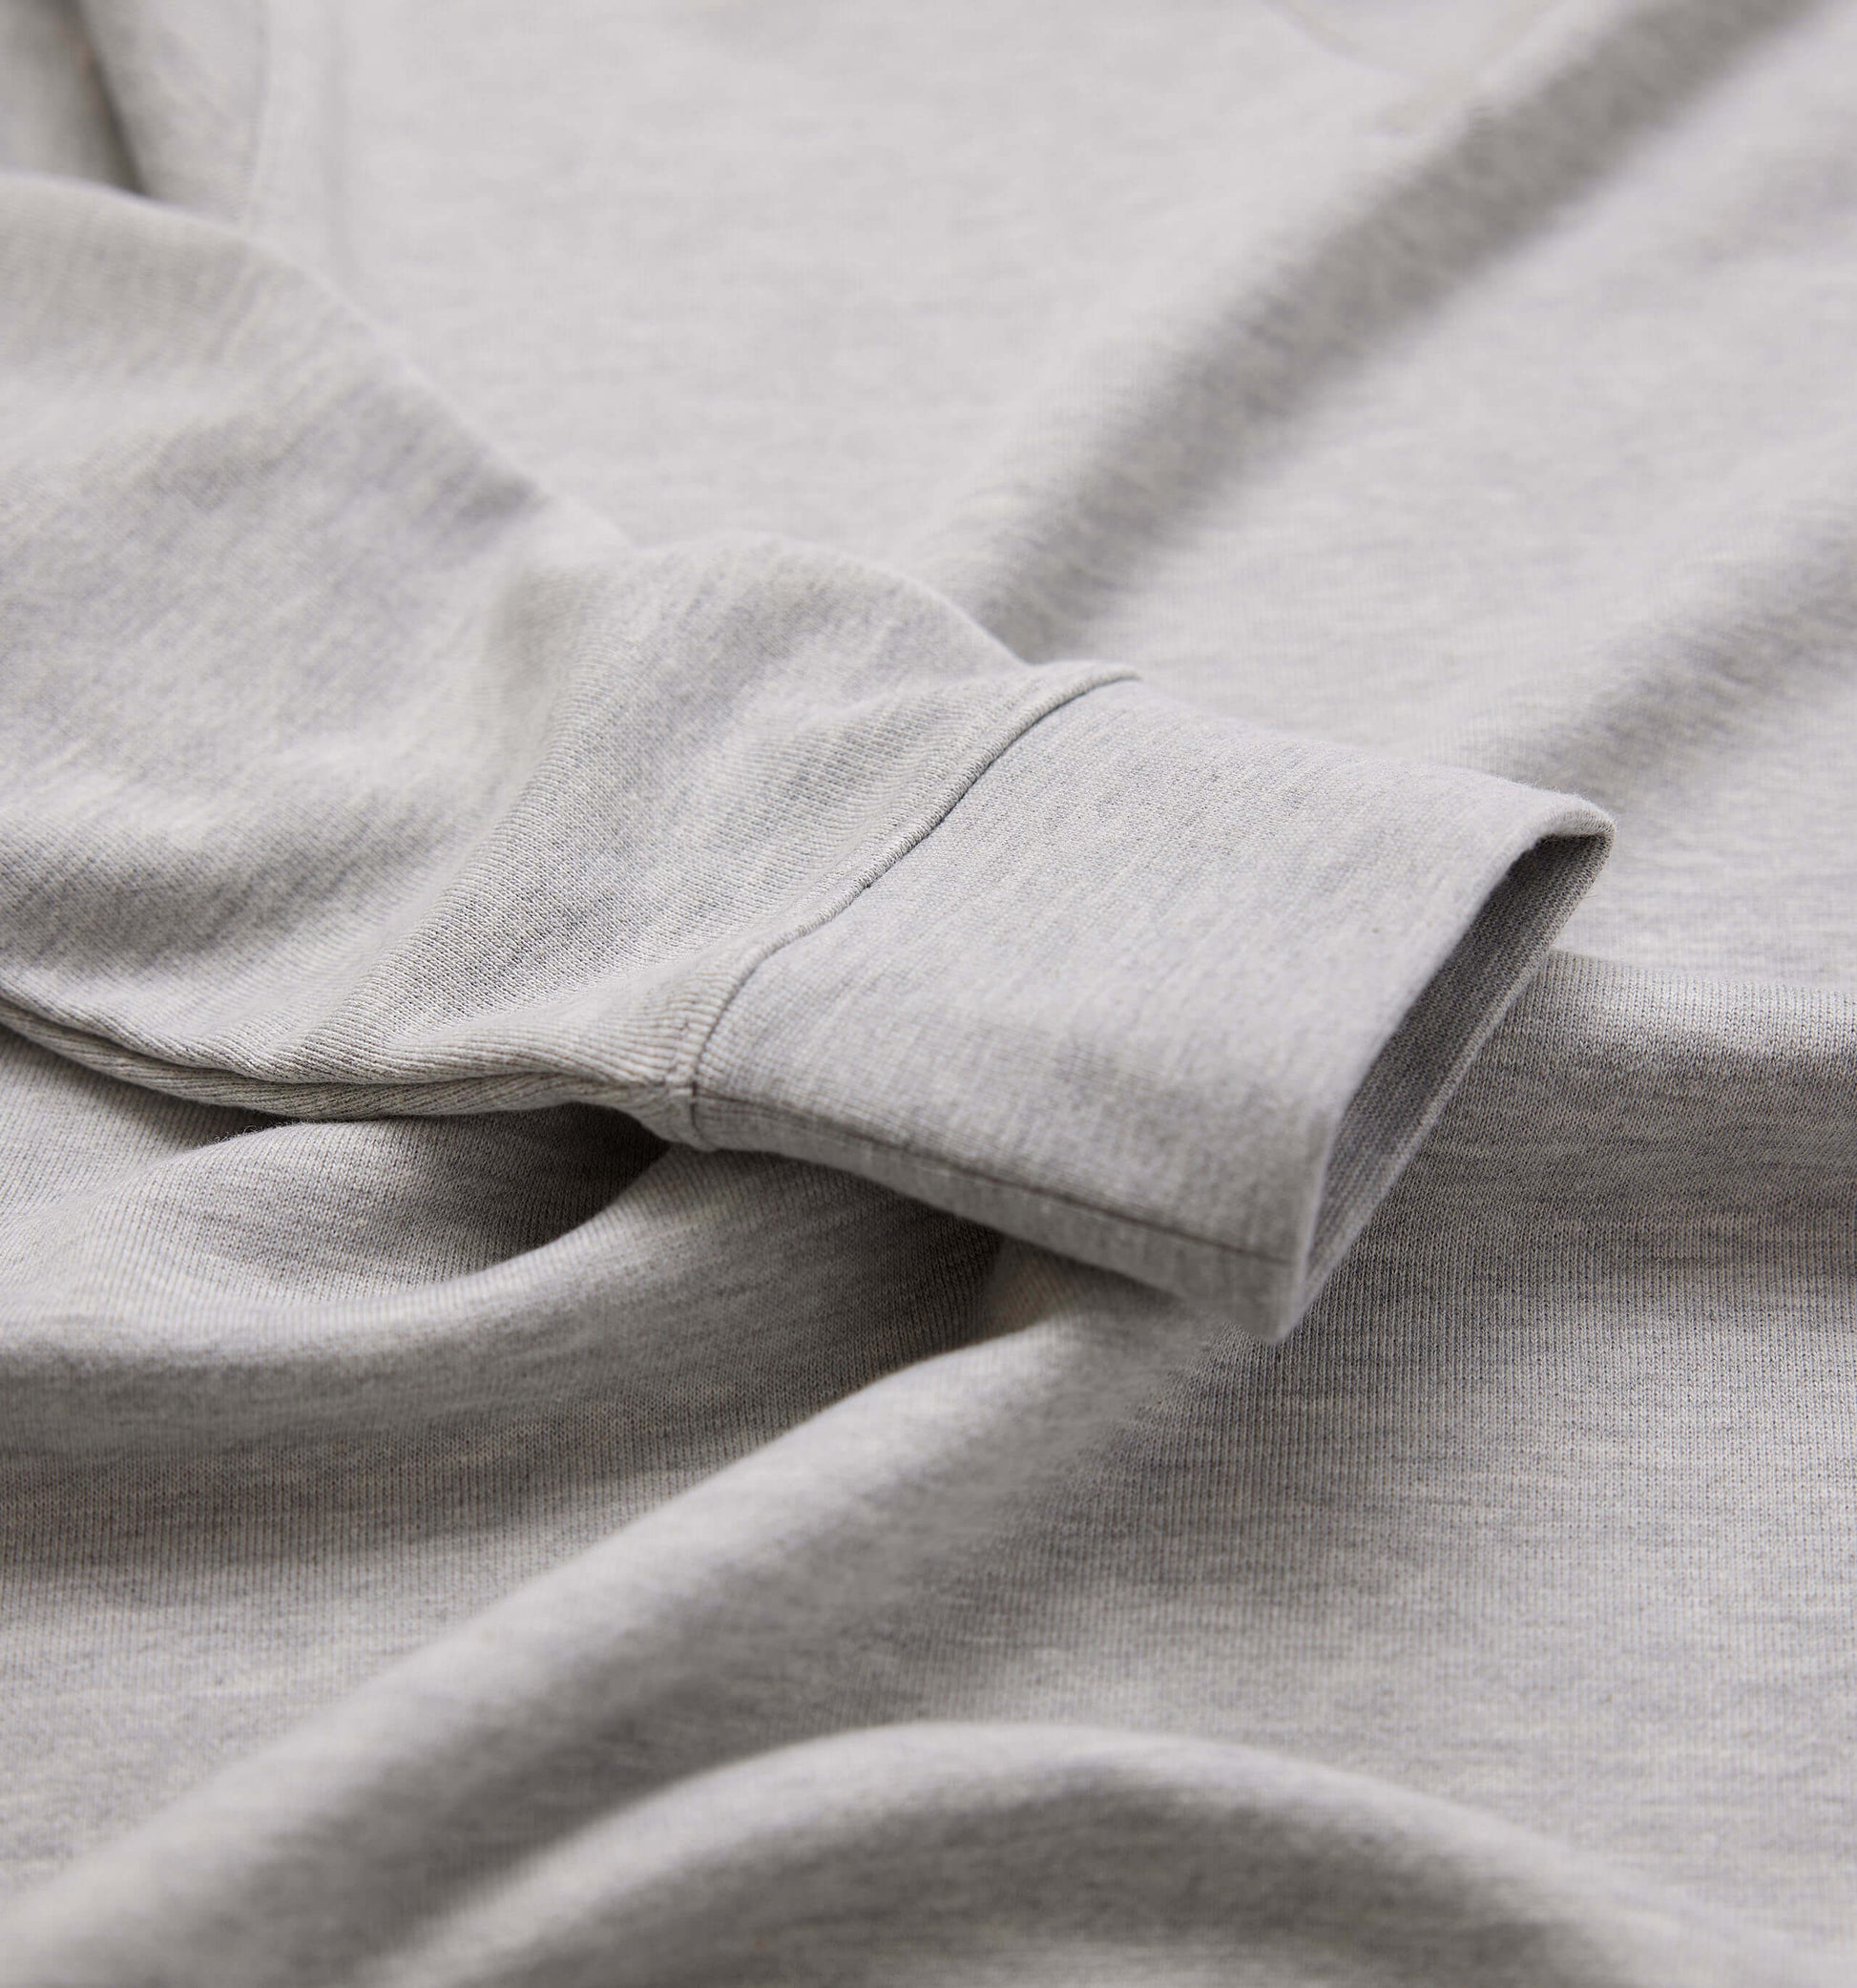 The George - French Terry Cotton Sweatshirt  In Grey From King Essentials